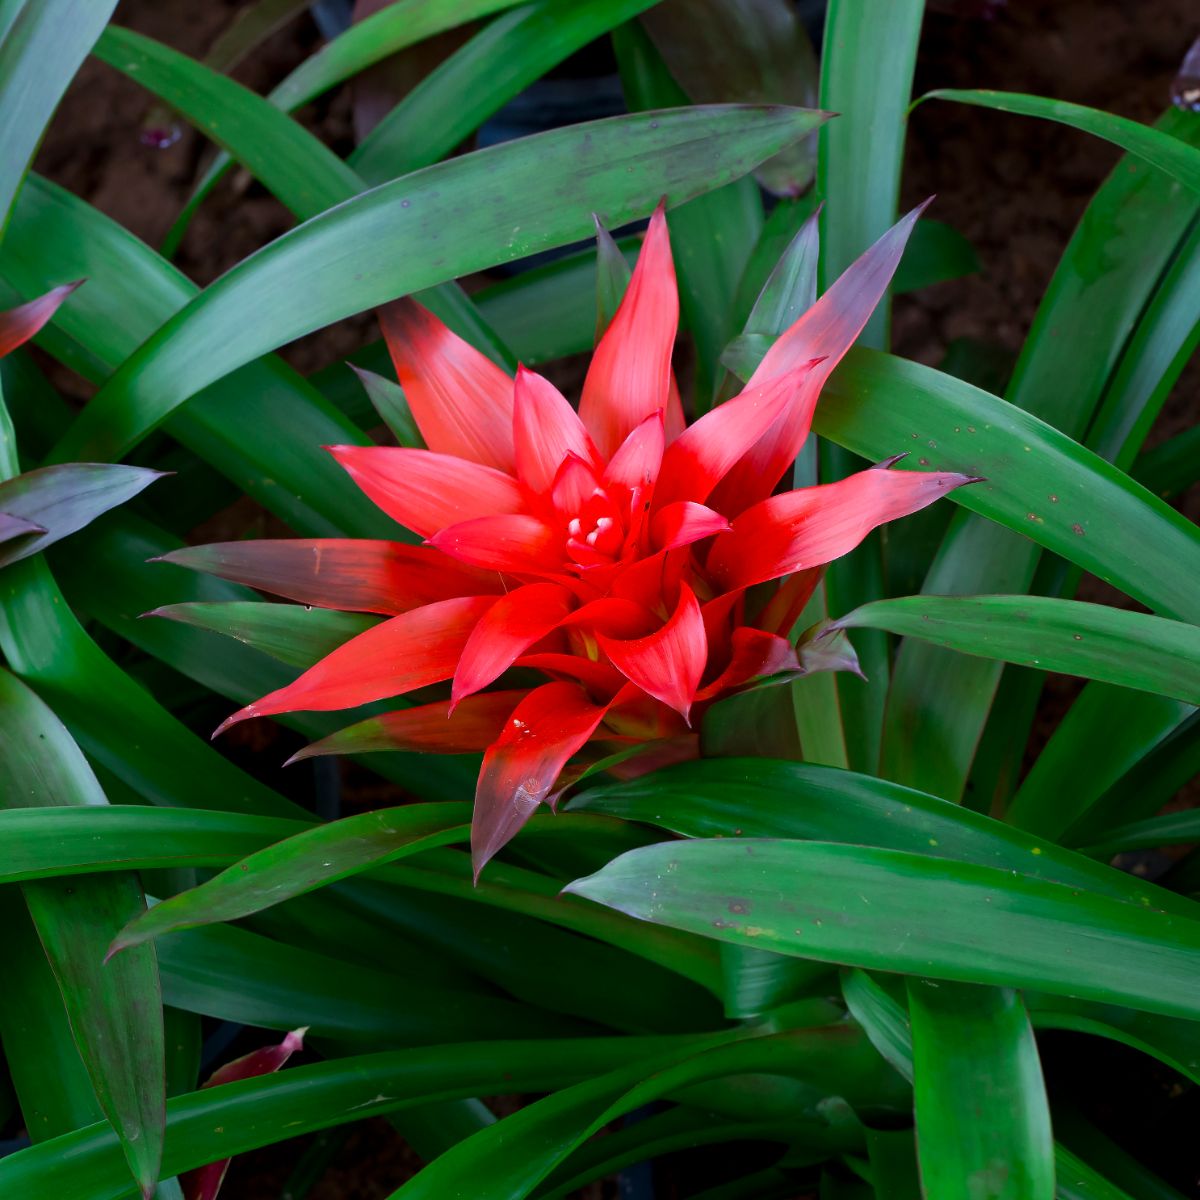 A close-up of a Bromeliad red blooming flower.